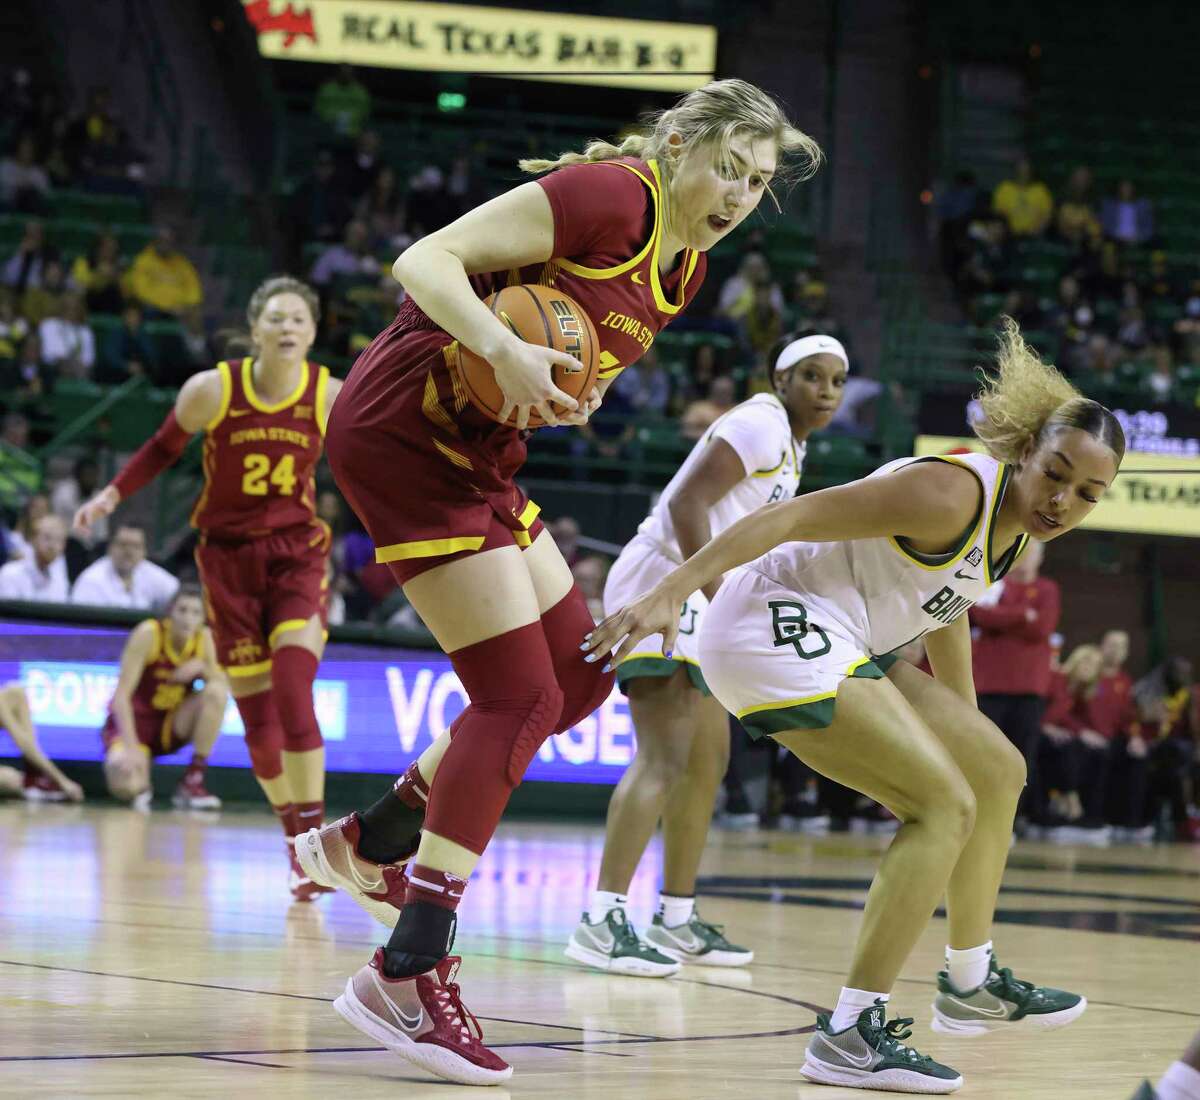 Iowa State forward Morgan Kane, left, pulls down a rebound over Baylor guard Jaden Owens, right, in the first half of an NCAA college basketball game, Sunday, Jan. 23, 2022, in Waco, Texas. (Rod Aydelotte/Waco Tribune-Herald via AP)